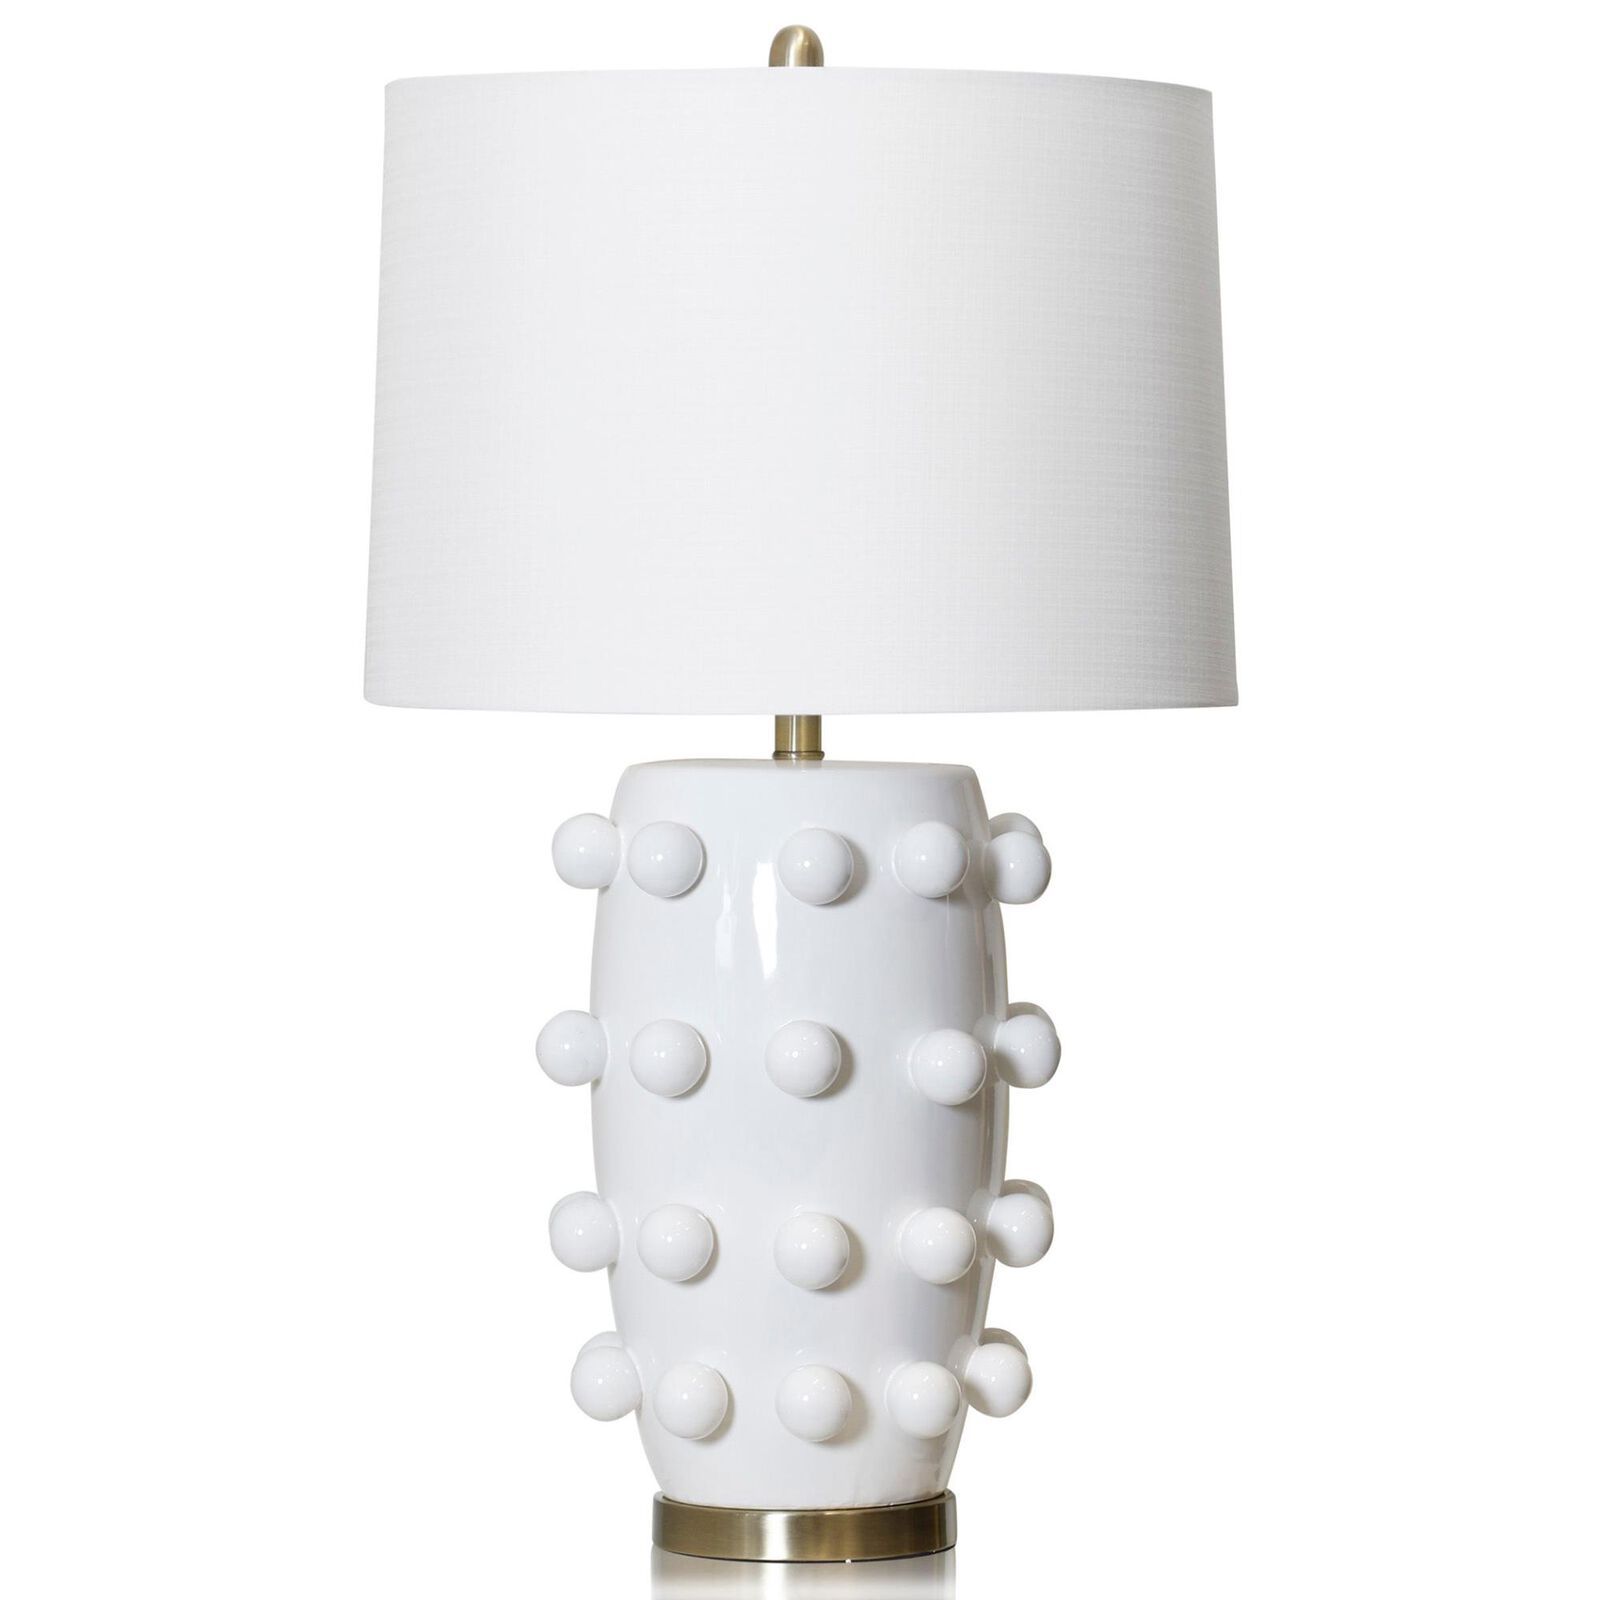 Marni Table Lamp by Harp and Finial | 1800 Lighting